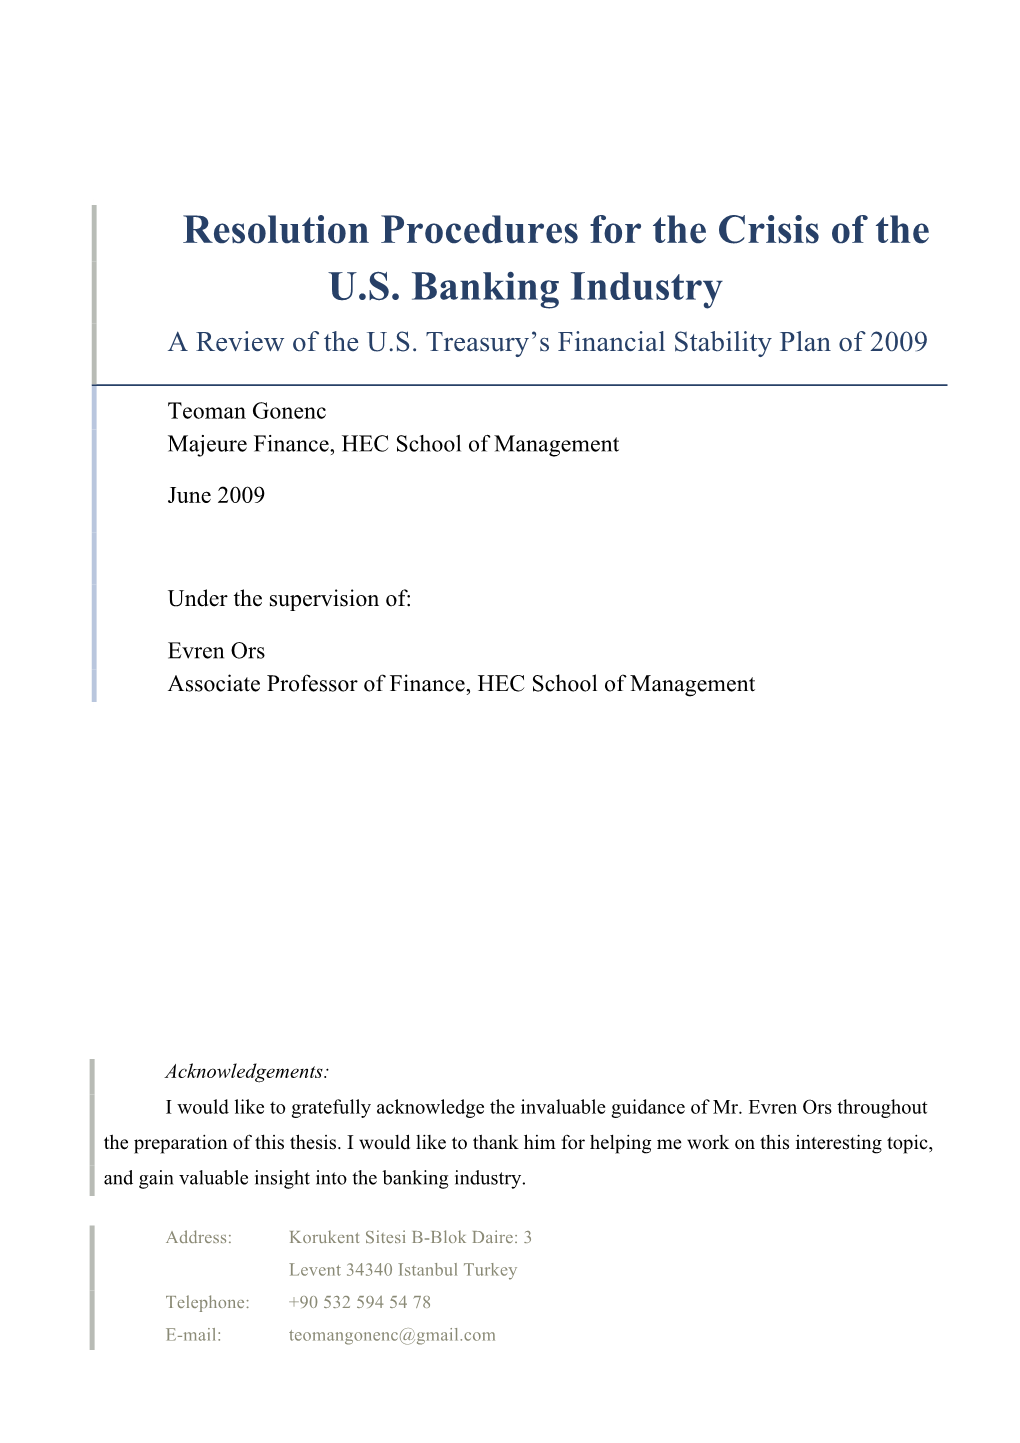 Resolution Procedures for the Crisis of the U.S. Banking Industry a Review of the U.S